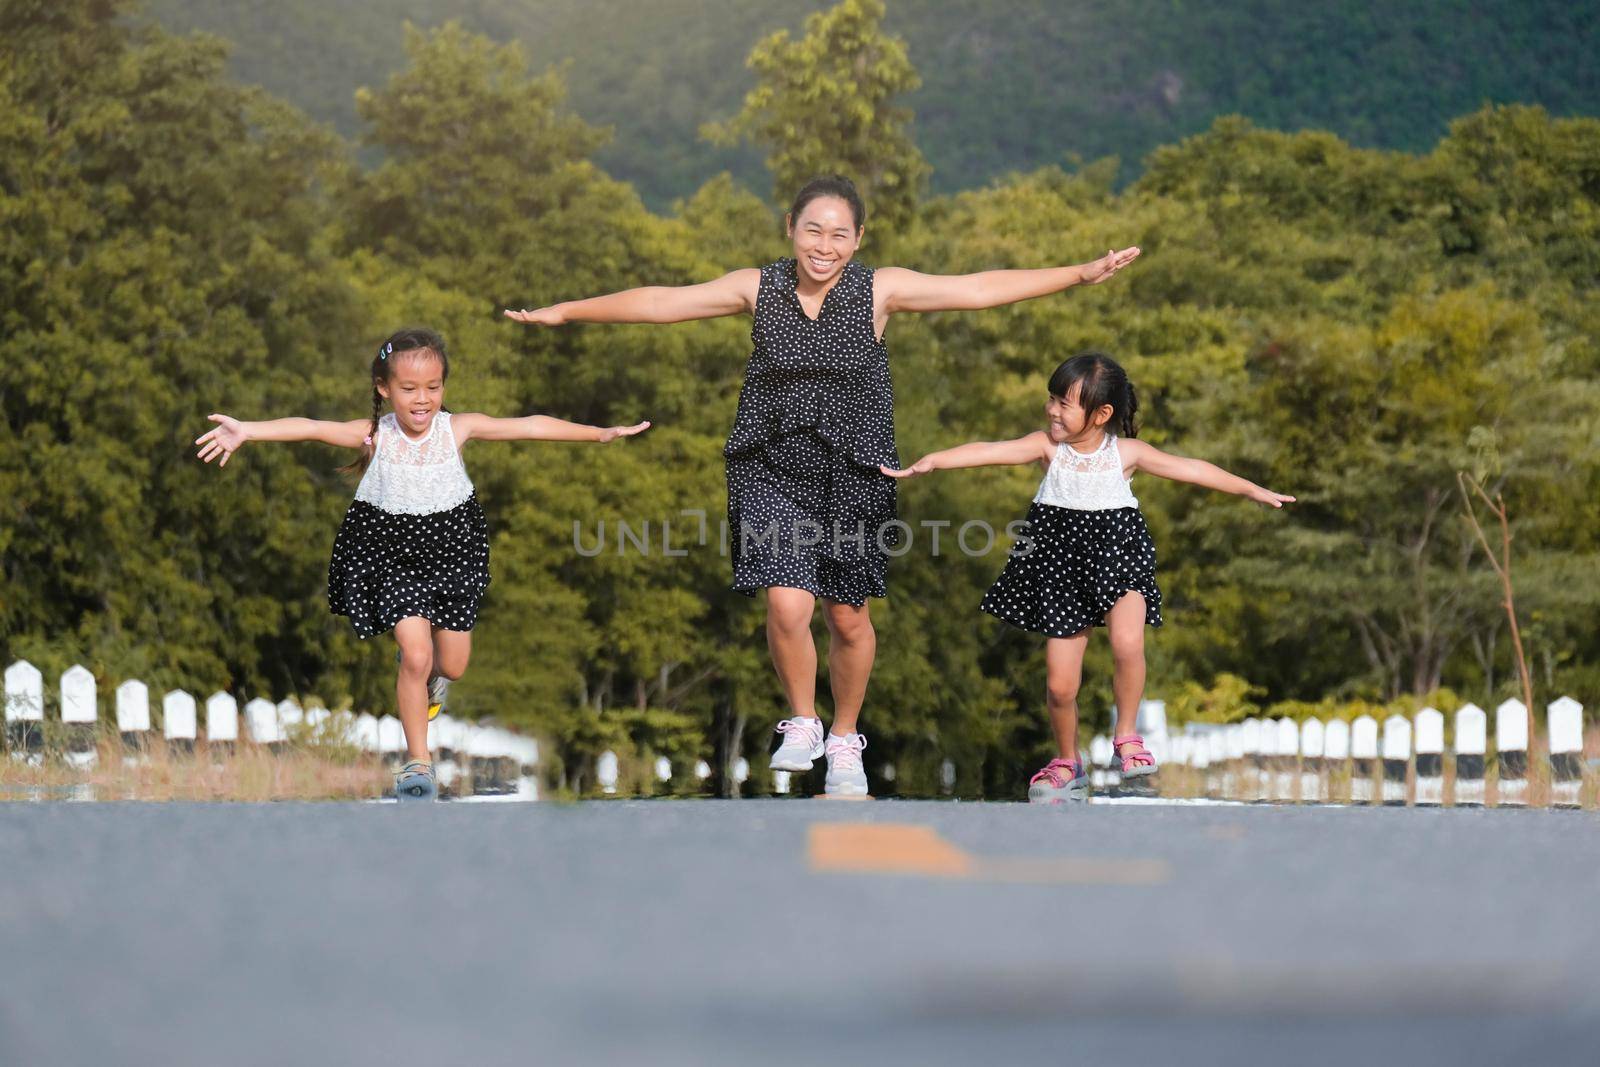 Two lovely daughters are running with their mother spreading their arms as if flying on the road in the park. Happy mother plays with the children in the park, spending time together on vacation.